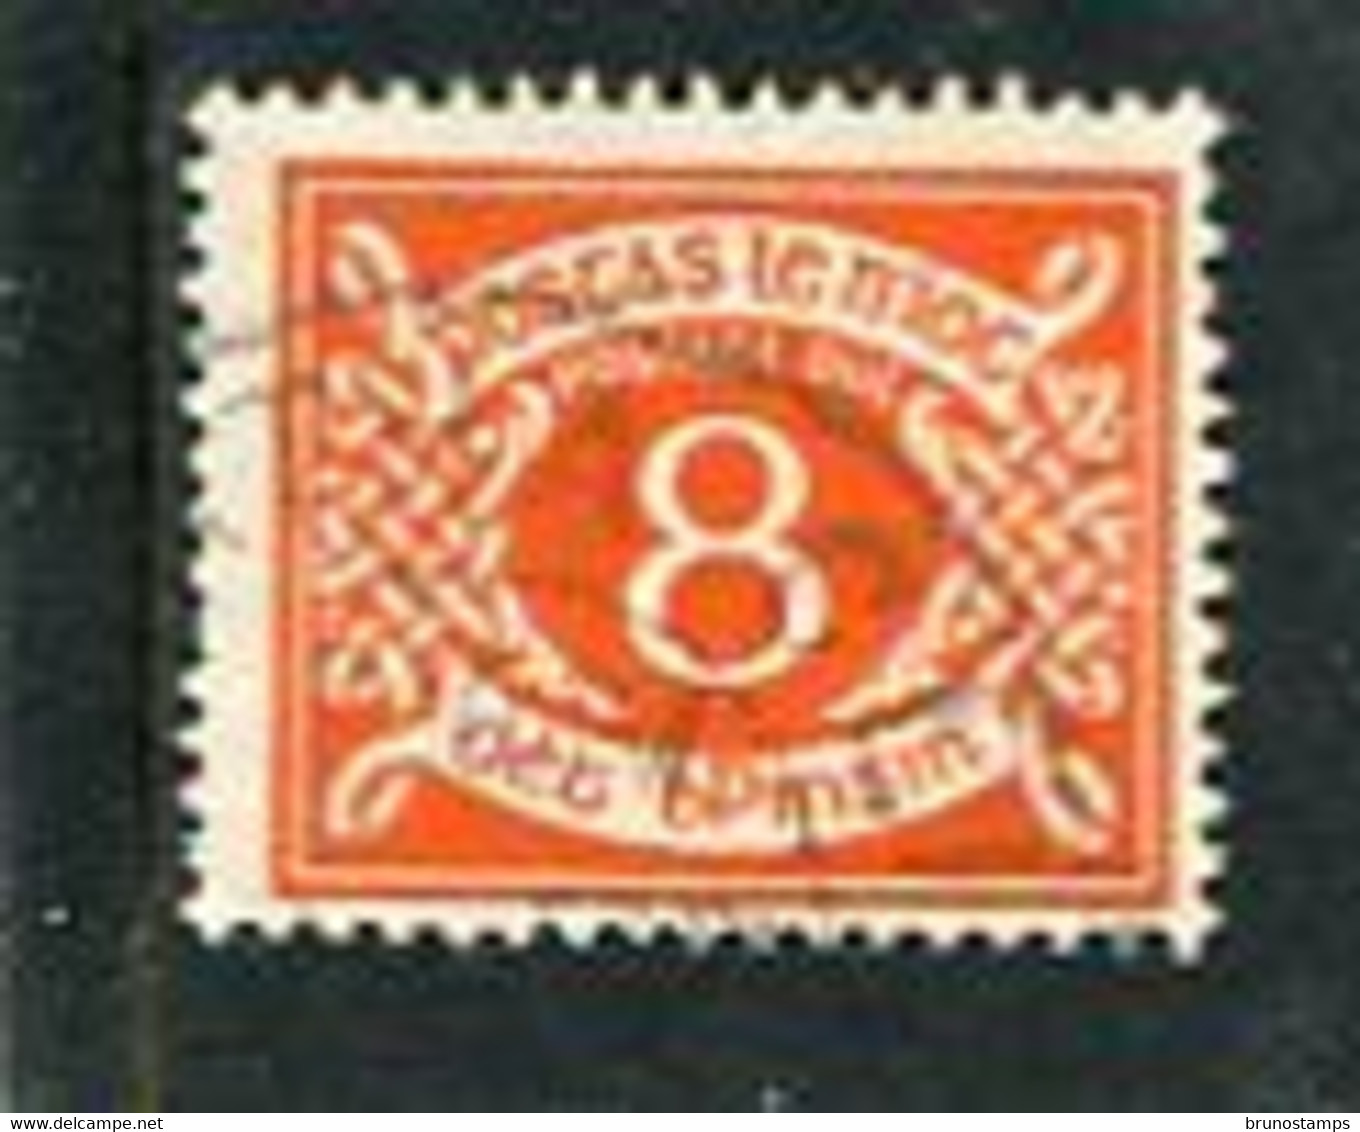 IRELAND/EIRE - 1962  POSTAGE DUE  8d  E WATERMARK  FINE USED - Timbres-taxe